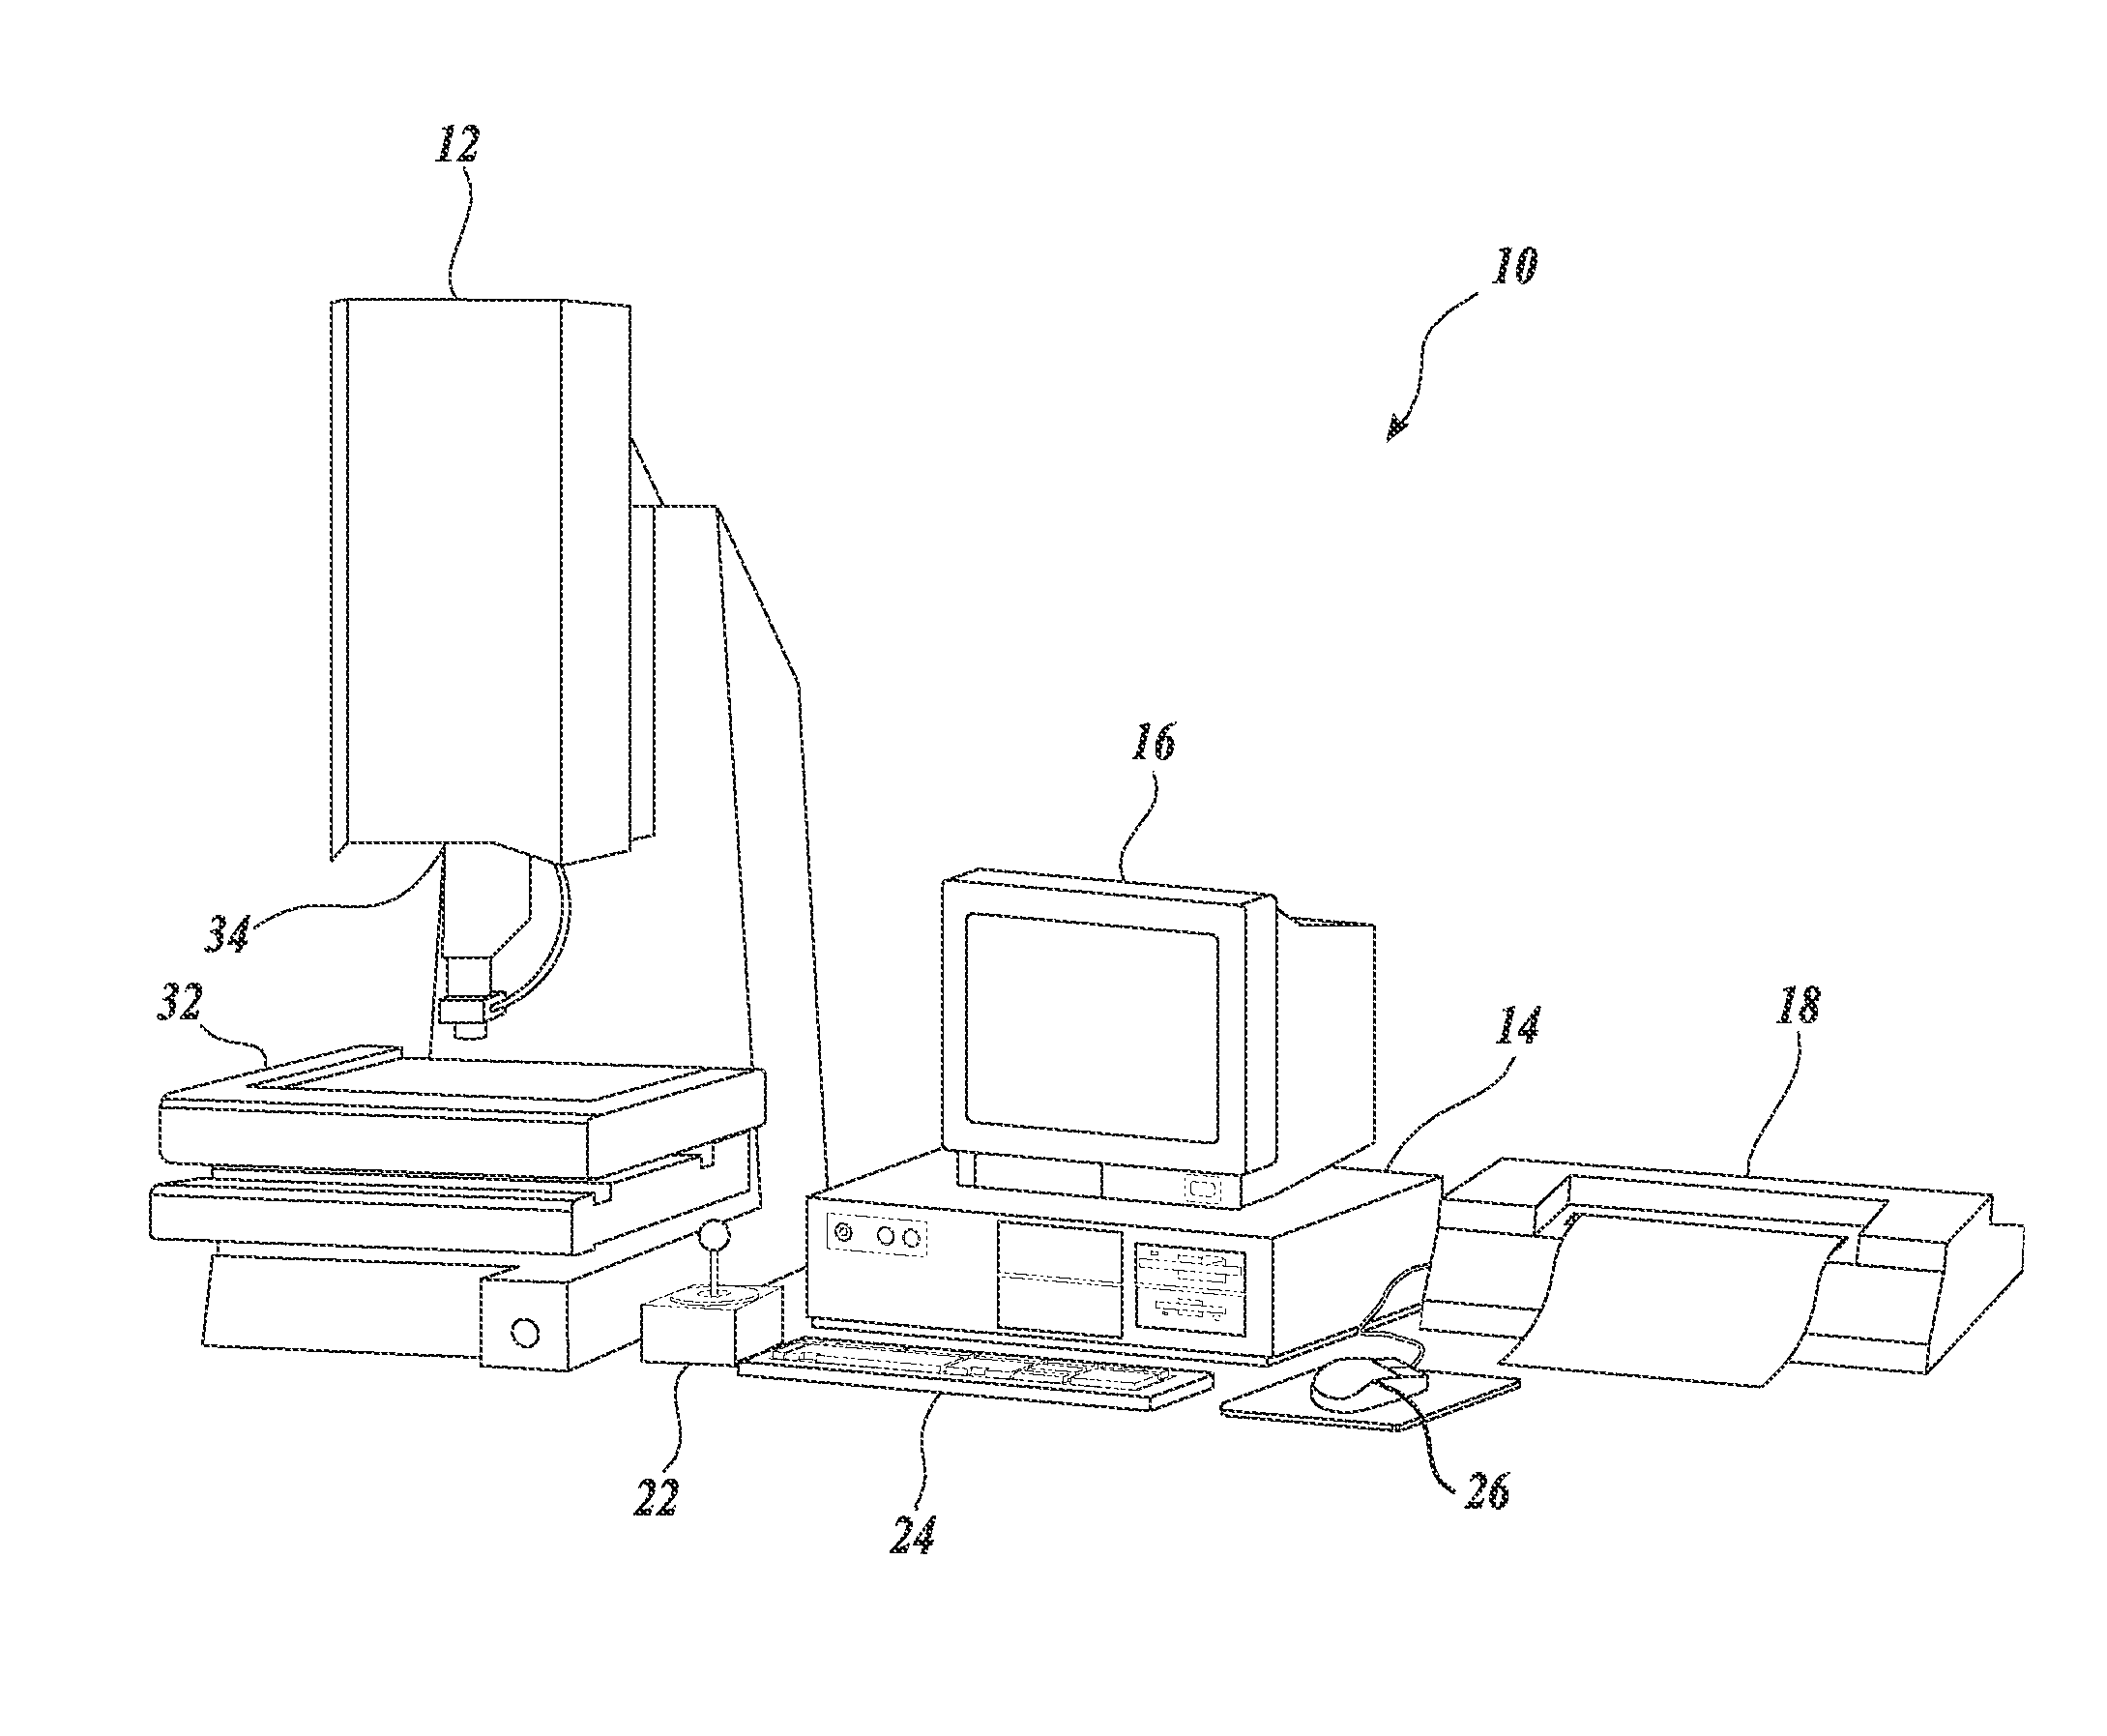 Inspecting potentially interfering features in a machine vision system